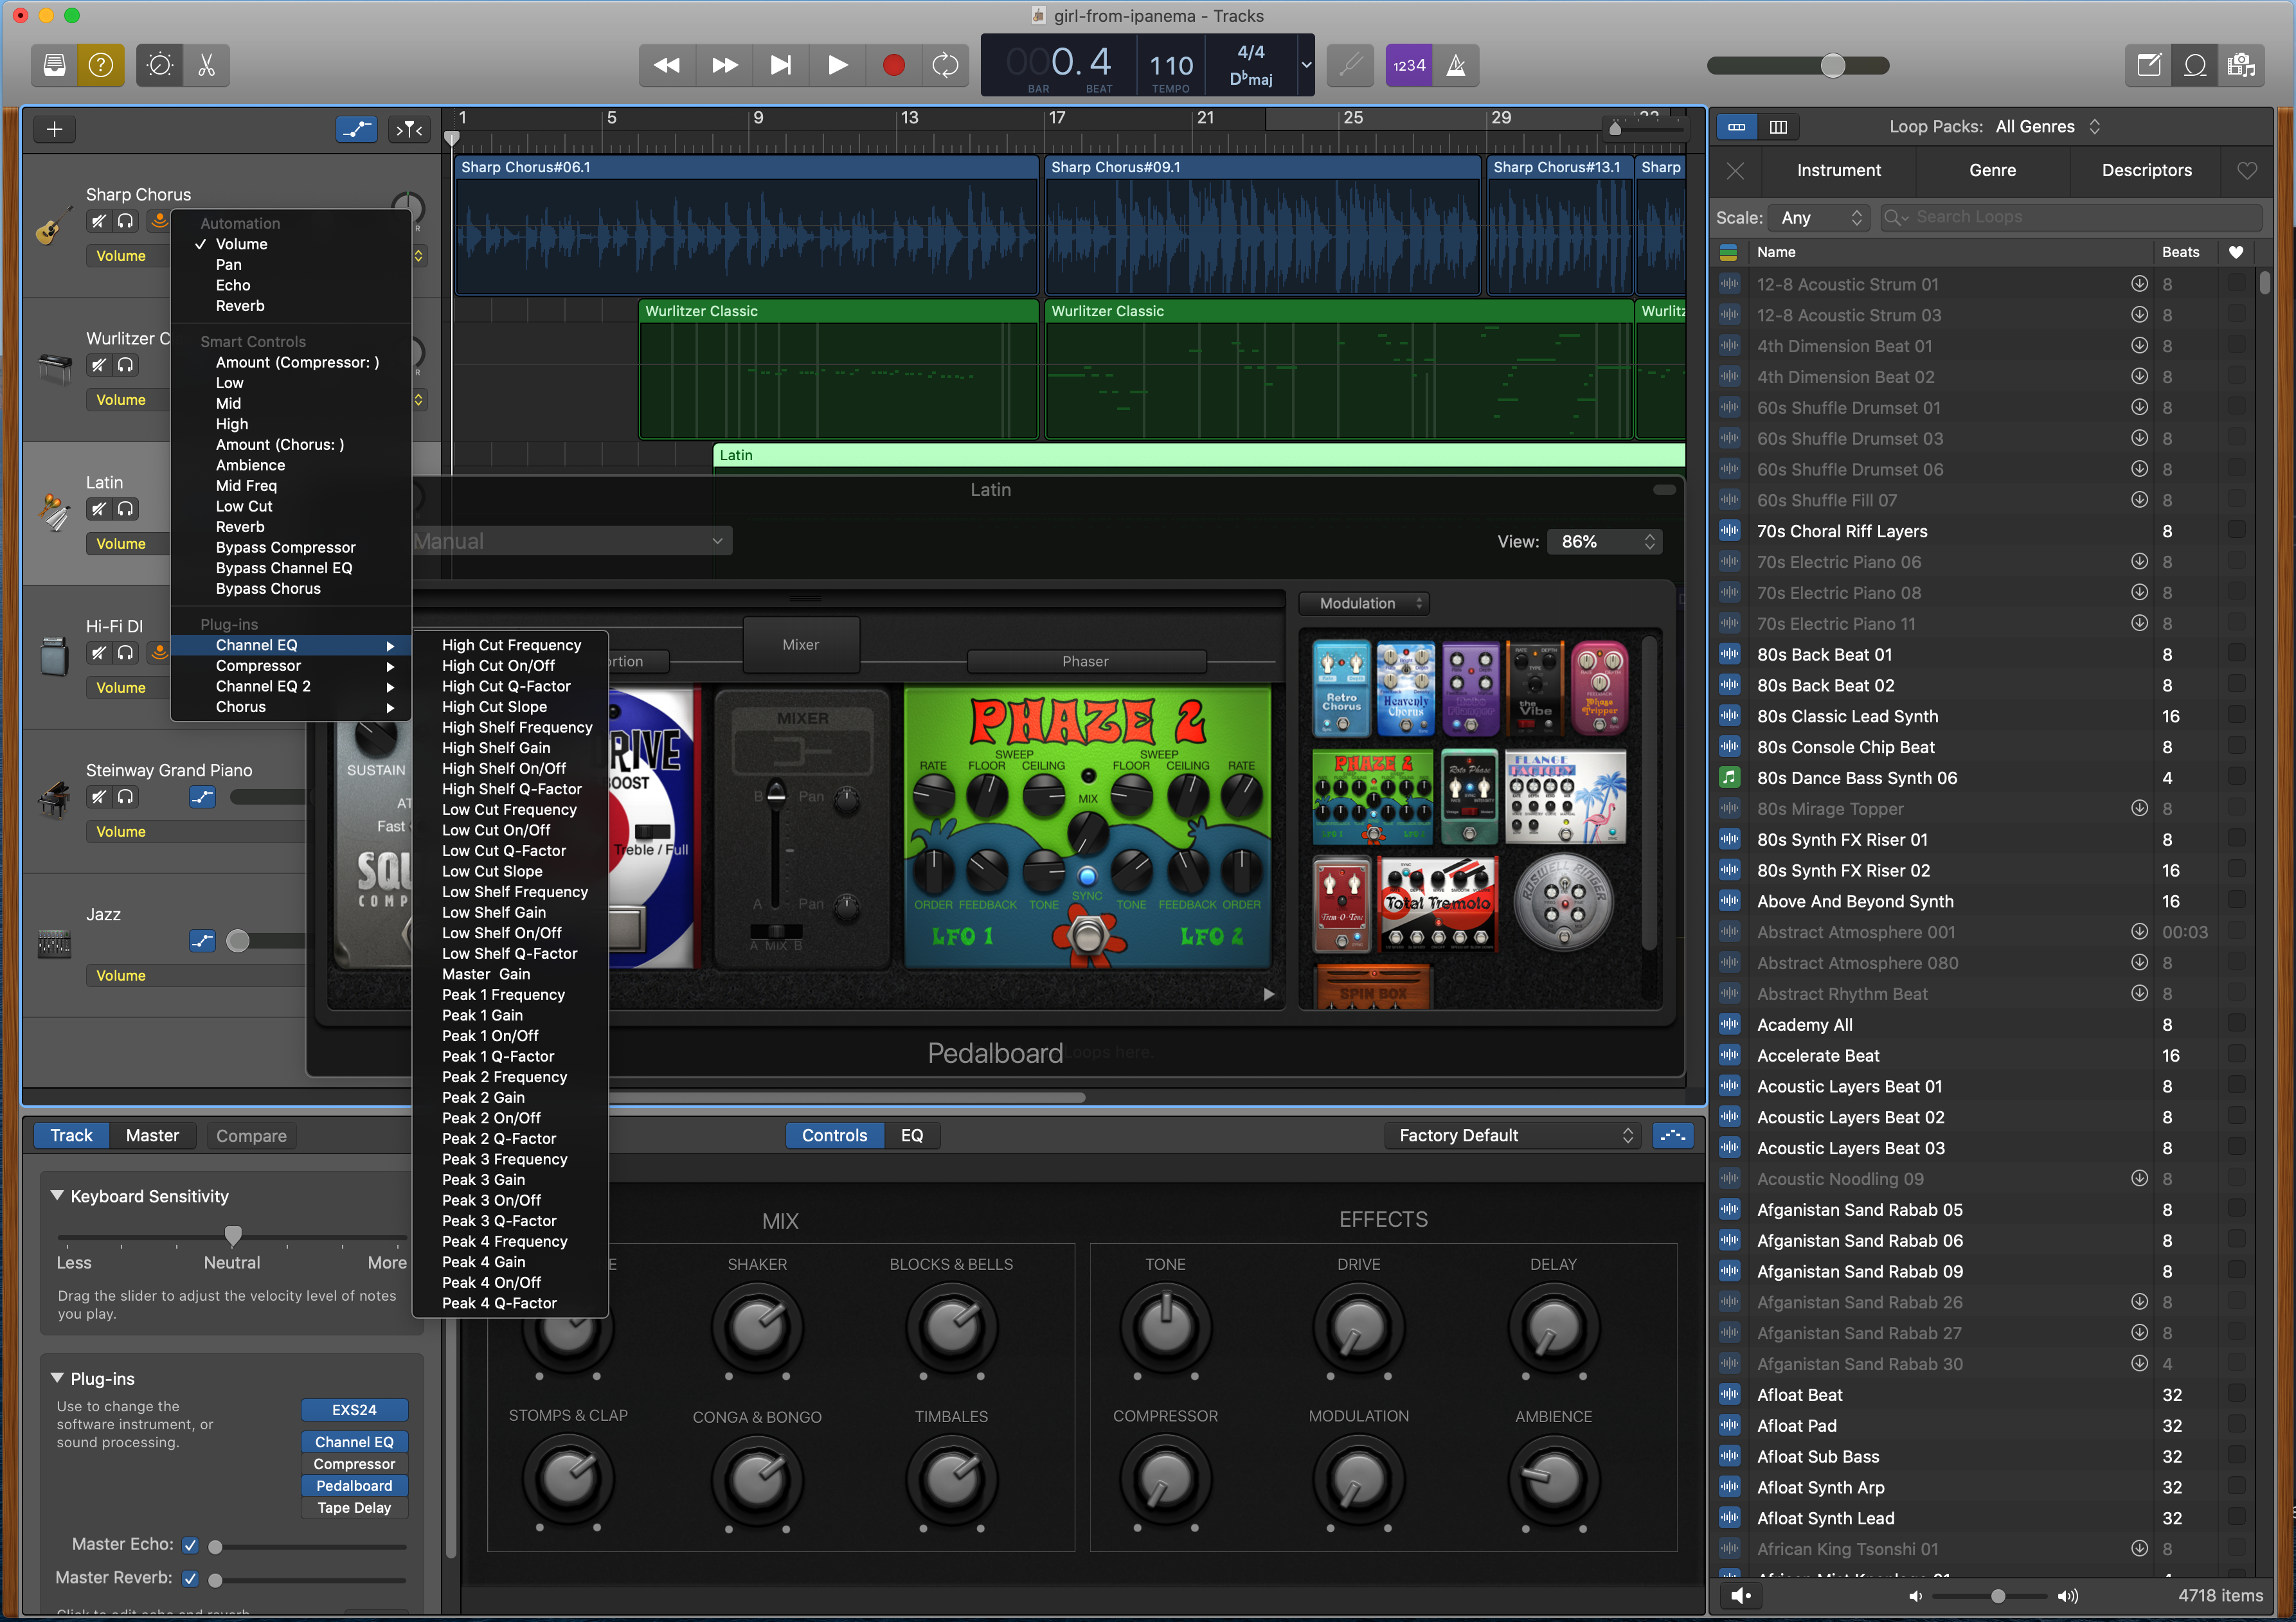 GarageBand interface showing the pedal board, loops panel, automation tools, and more